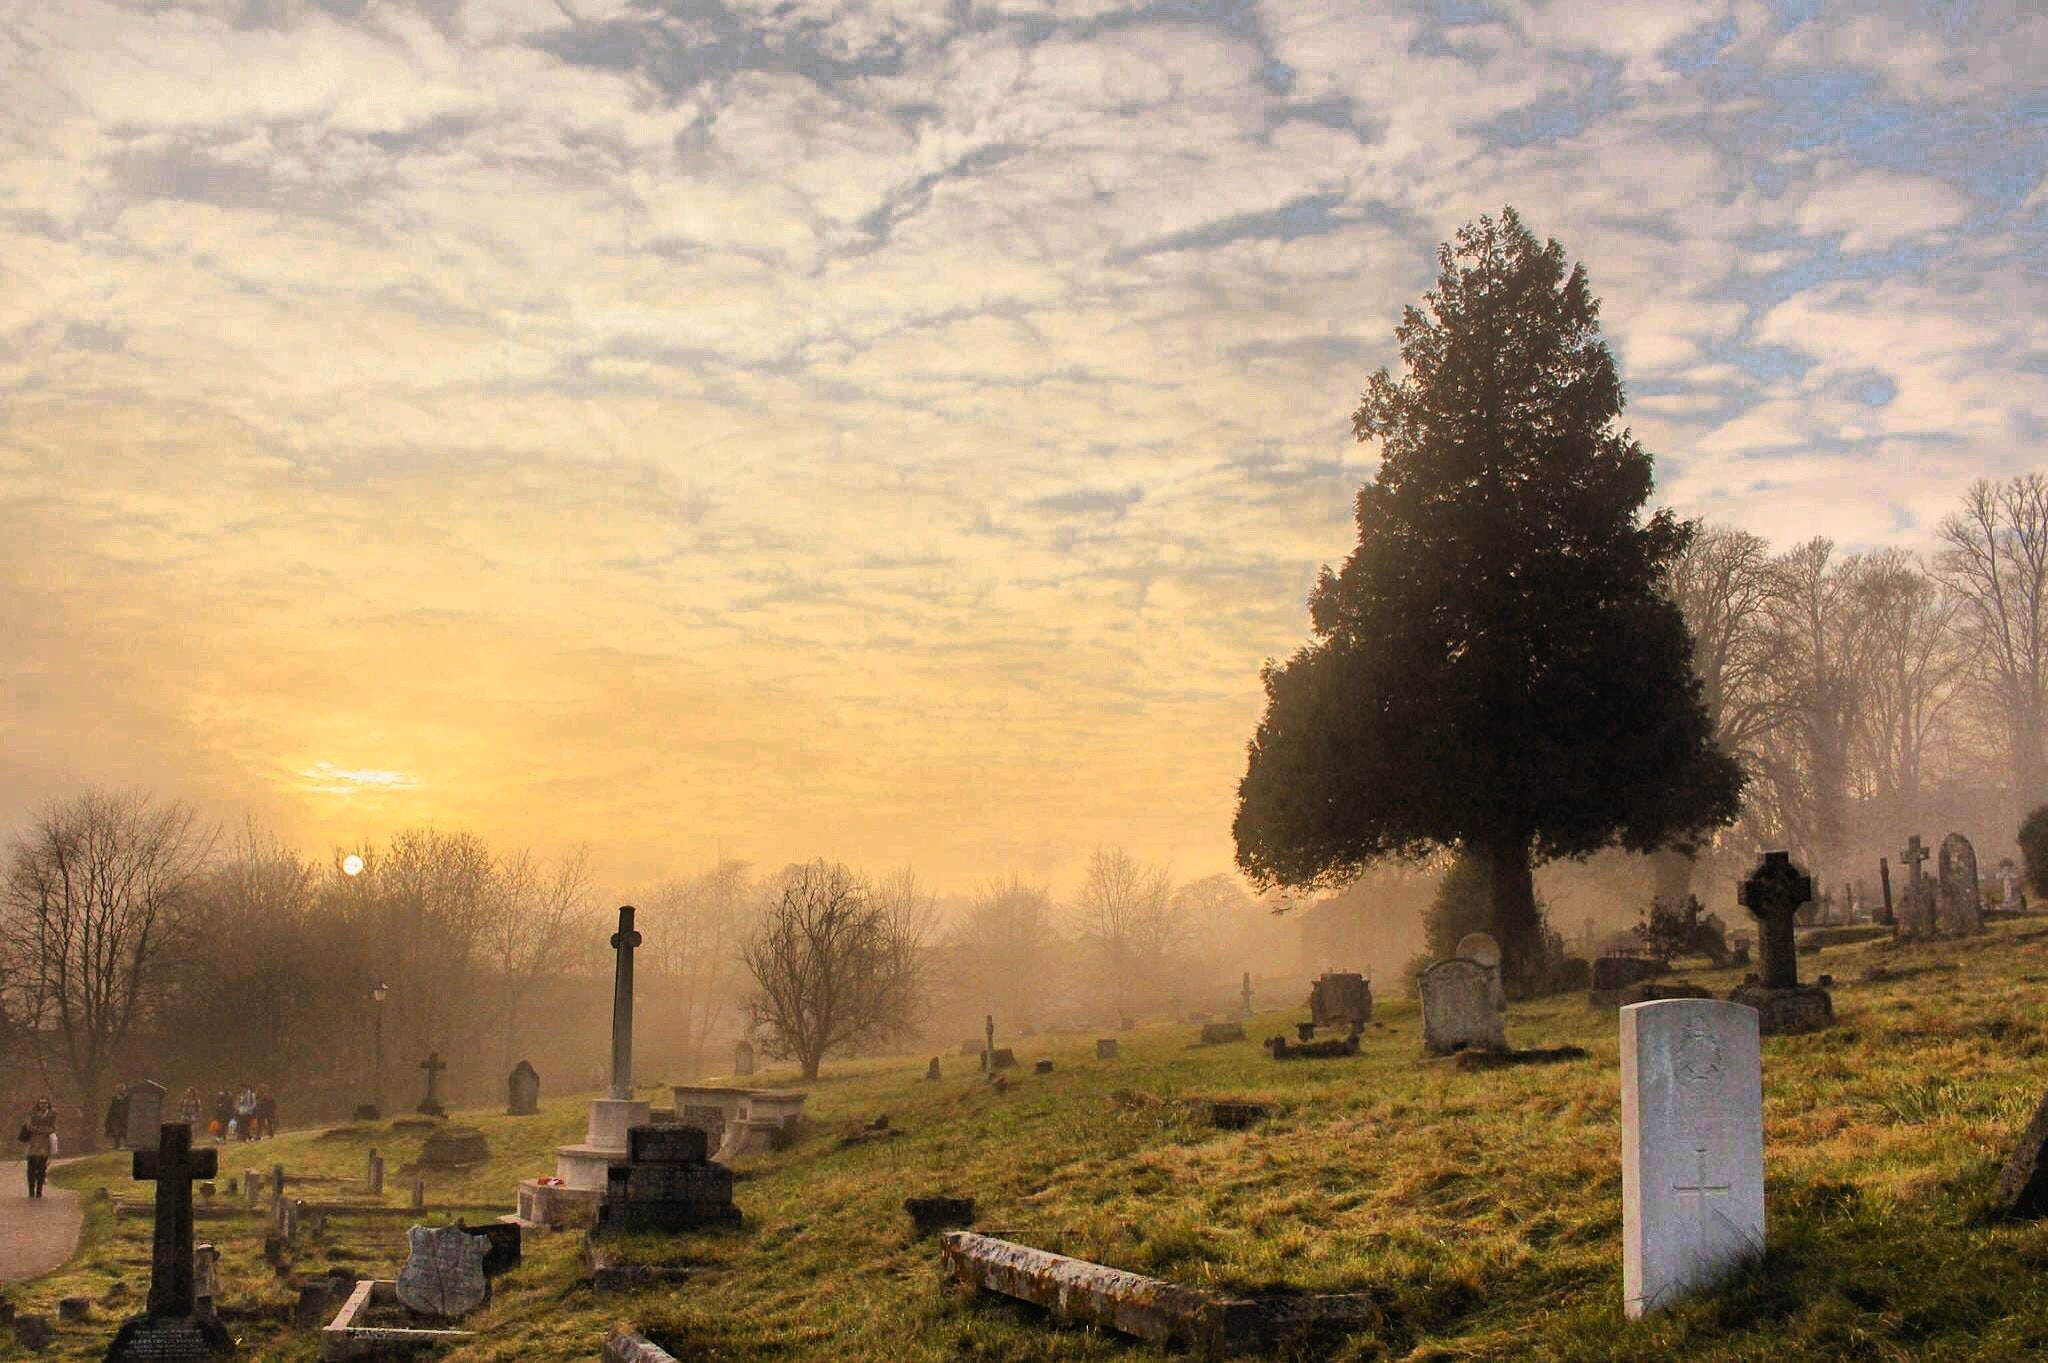 Cemetery Under the Cloudy Sky, Cemetery, Landscape, Trees, Sunset, HQ Photo